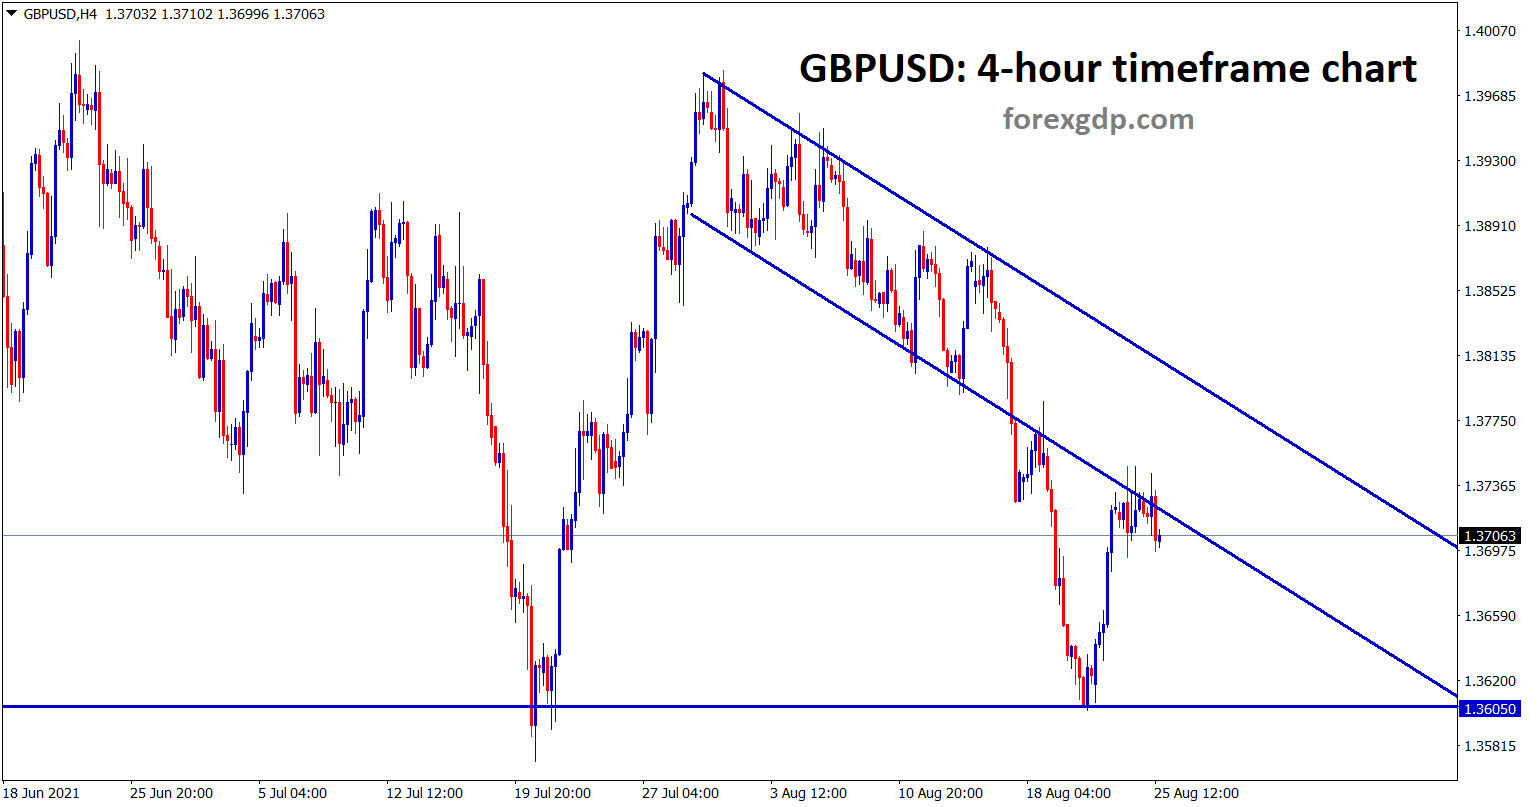 GBPUSD is retesting the broken channel again after rebounding from the support area.